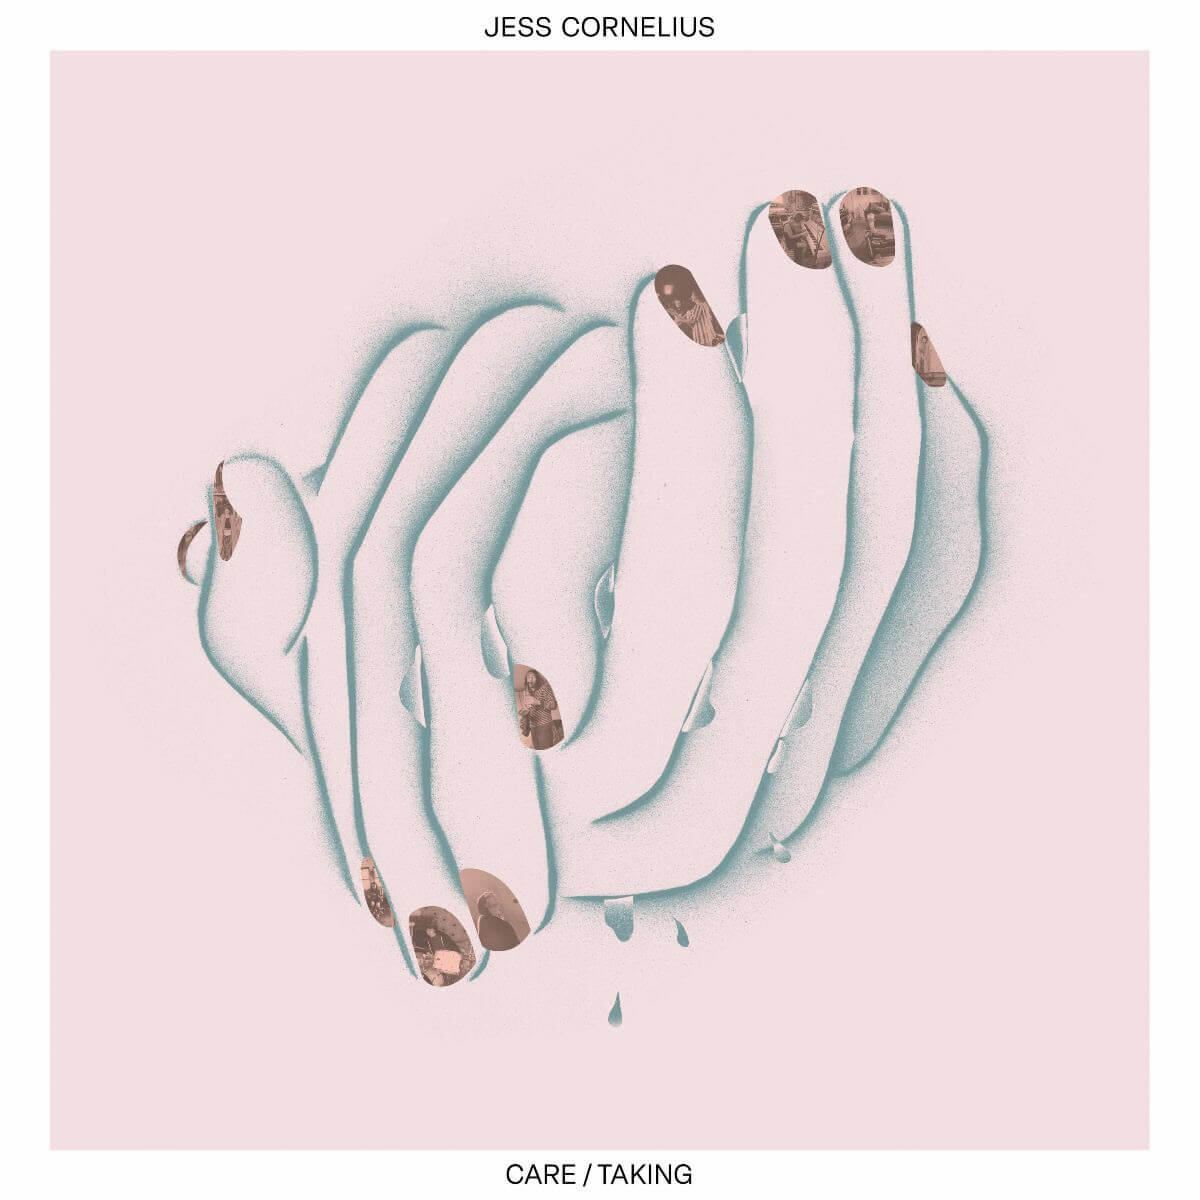 Jess Cornelius shares new single/video, “Laps in the Drugstore.” The track is off her upcoming LP CARE/TAKING, available June 14th